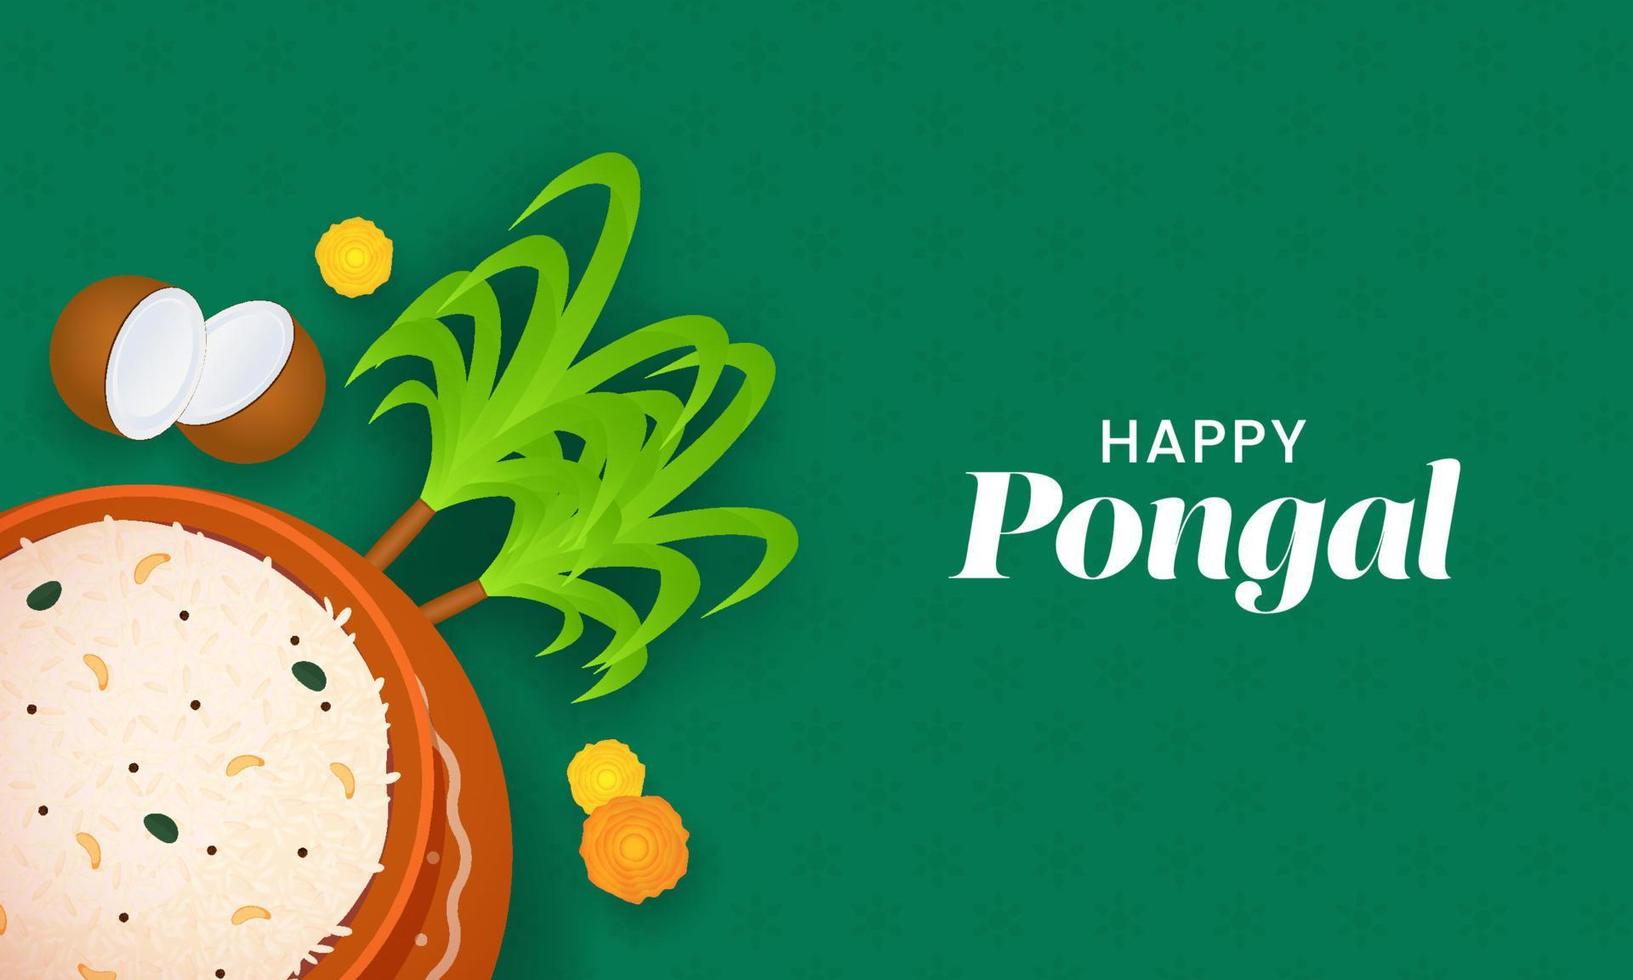 Happy Pongal Celebration Concept With Top View Clay Pot Full Of Pongali Rice, Coconut, Sugarcanes And Marigold Flowers On Green Background. vector